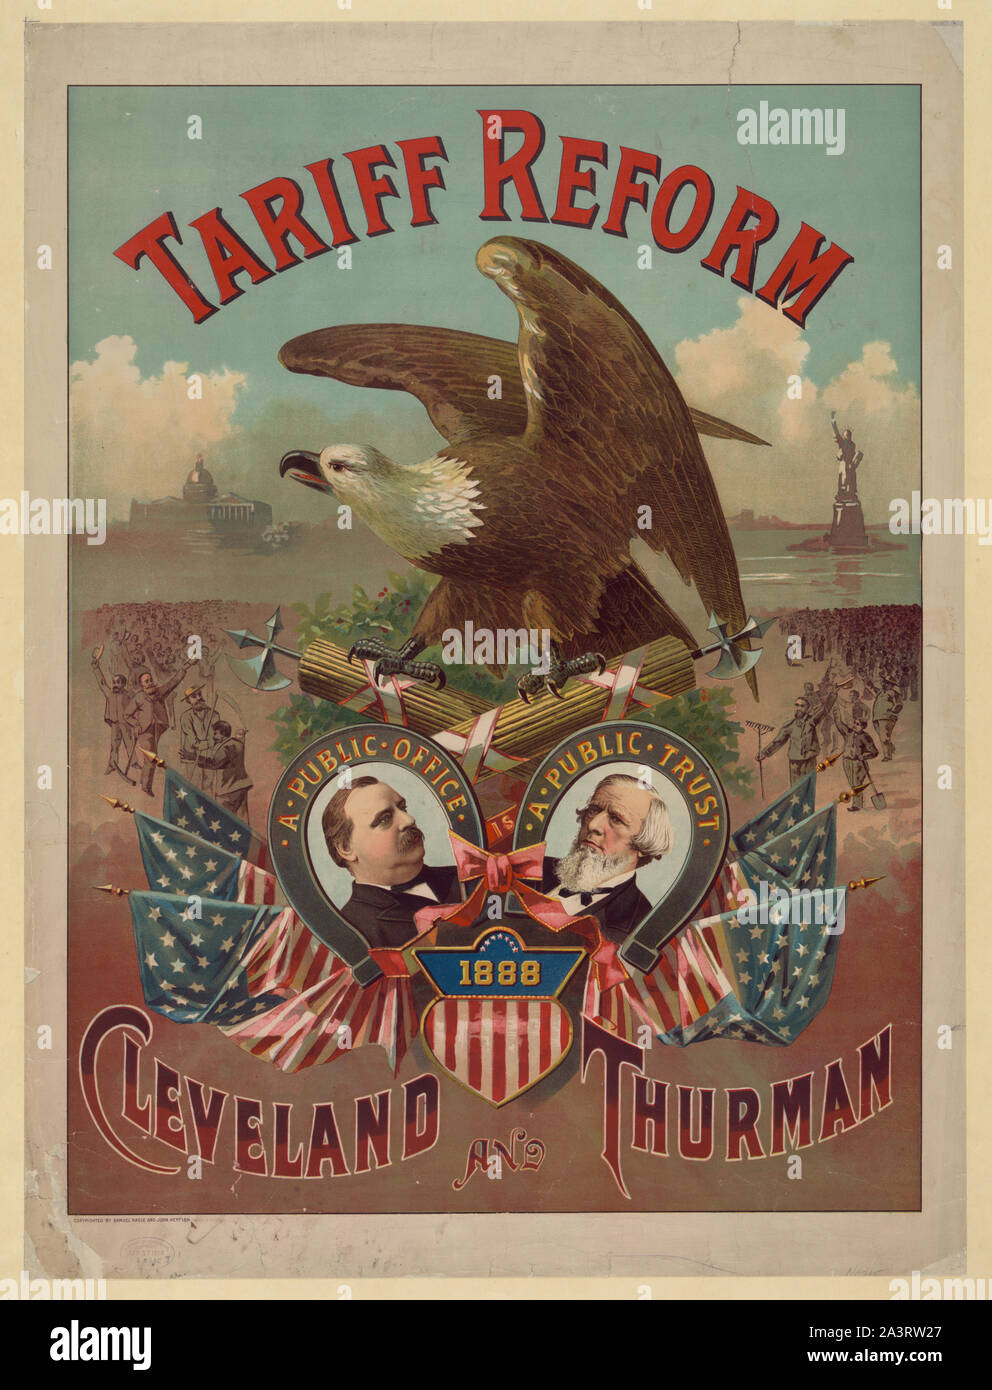 Tariff reform. Cleveland and Thurman Stock Photo